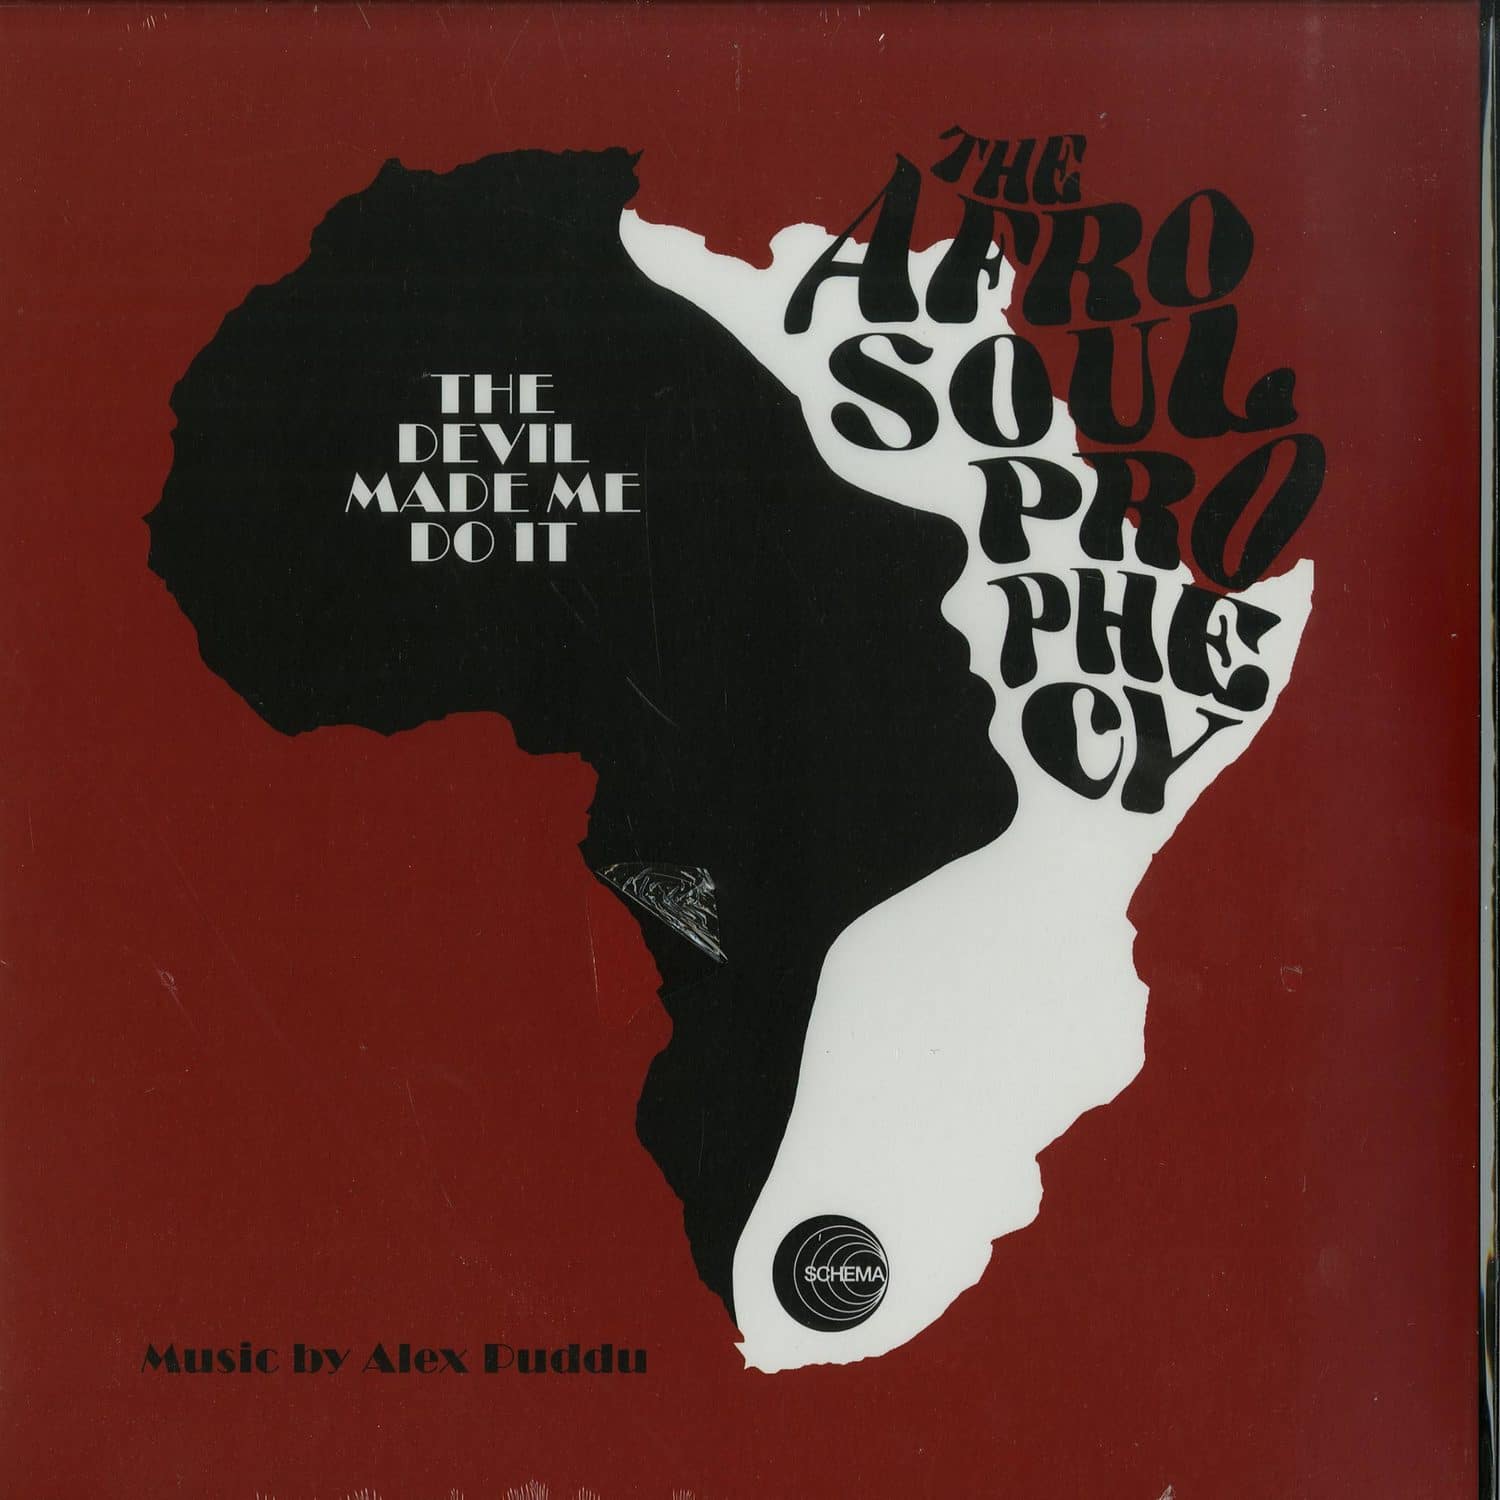 The Afro Soul Prophecy - THE DEVIL MADE ME DO IT 